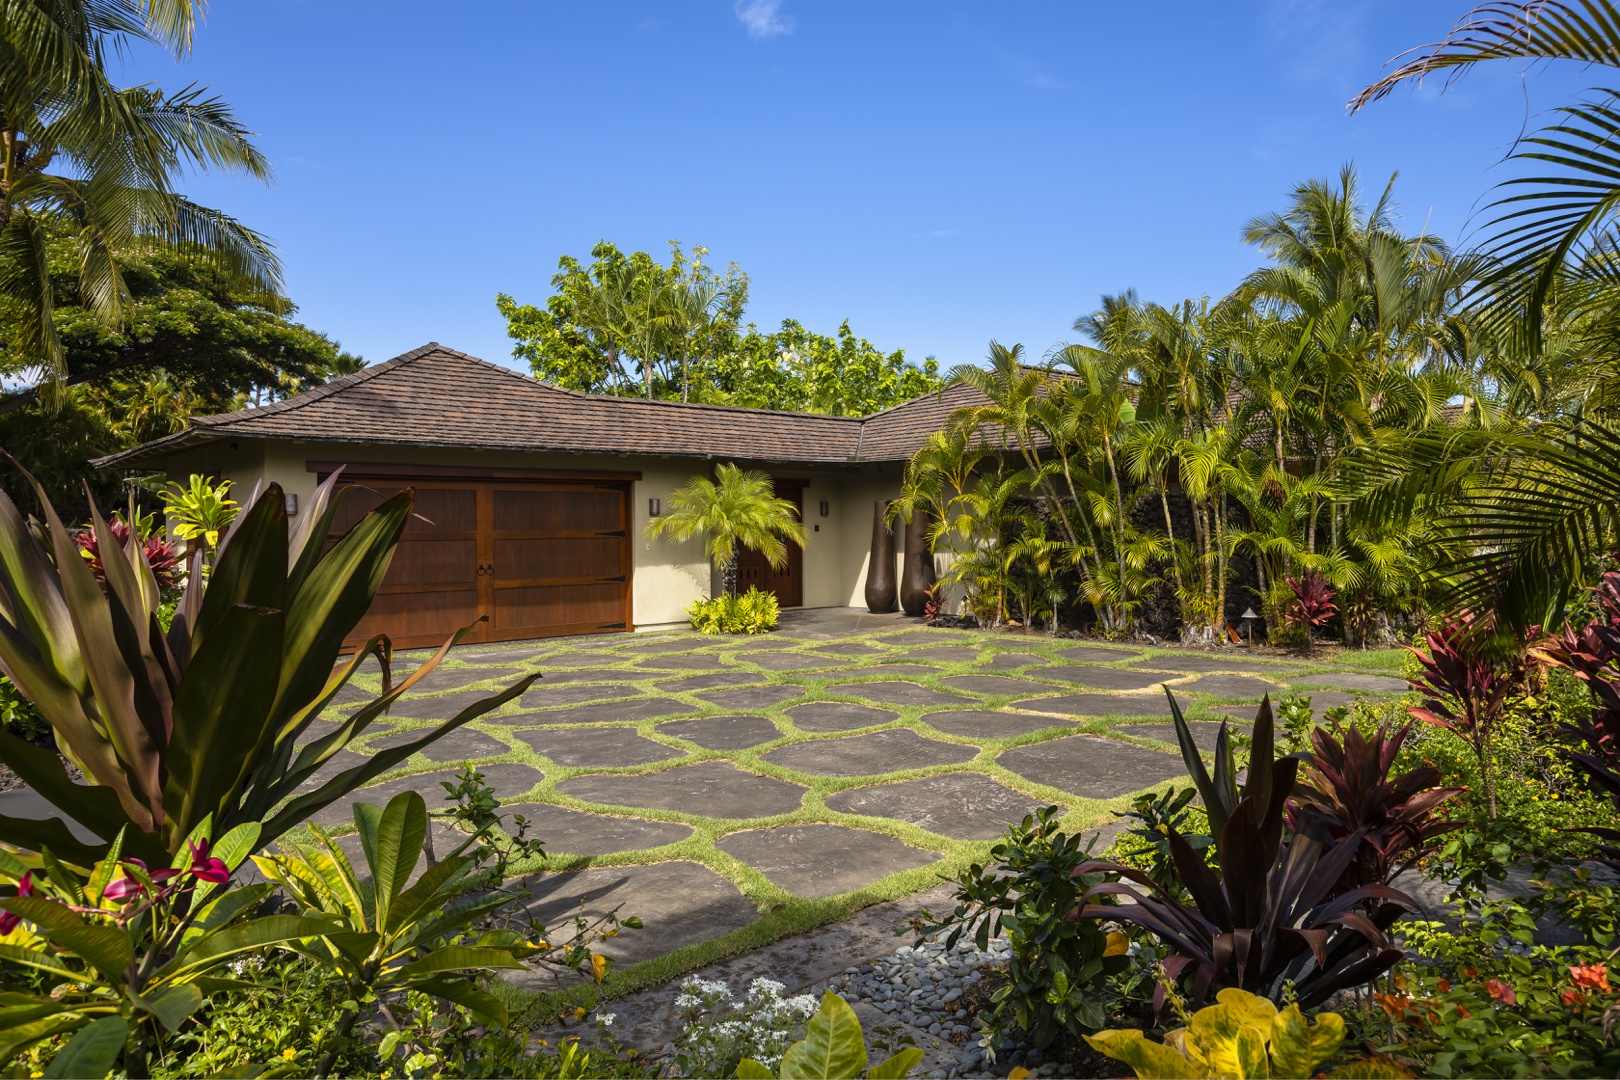 Kailua Kona Vacation Rentals, 4BD Kahikole Street (218) Estate Home at Four Seasons Resort at Hualalai - Driveway surrounded by luscious landscaping, offering privacy & ample parking